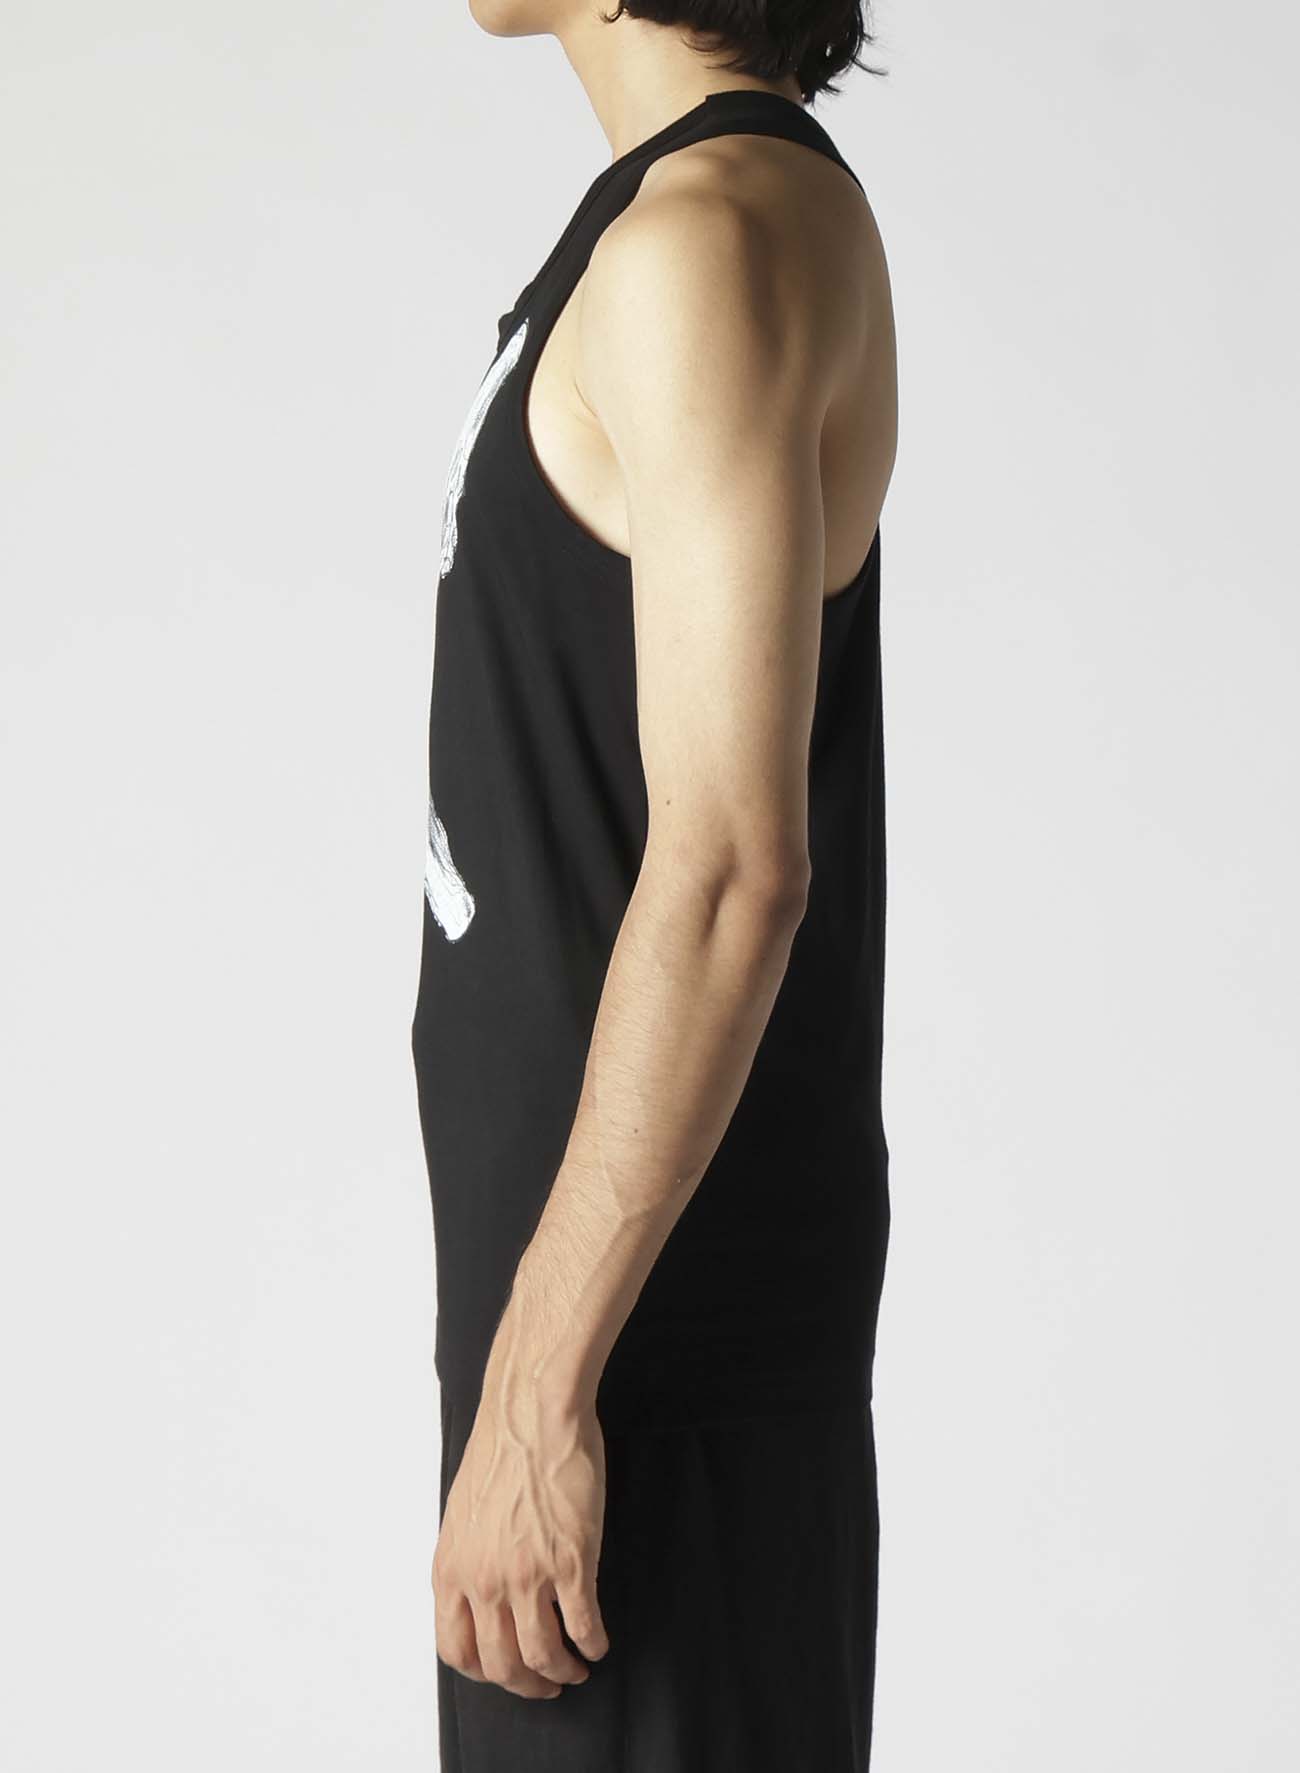 30/- COMBED SINGLE JERSEY PT TANK TOP